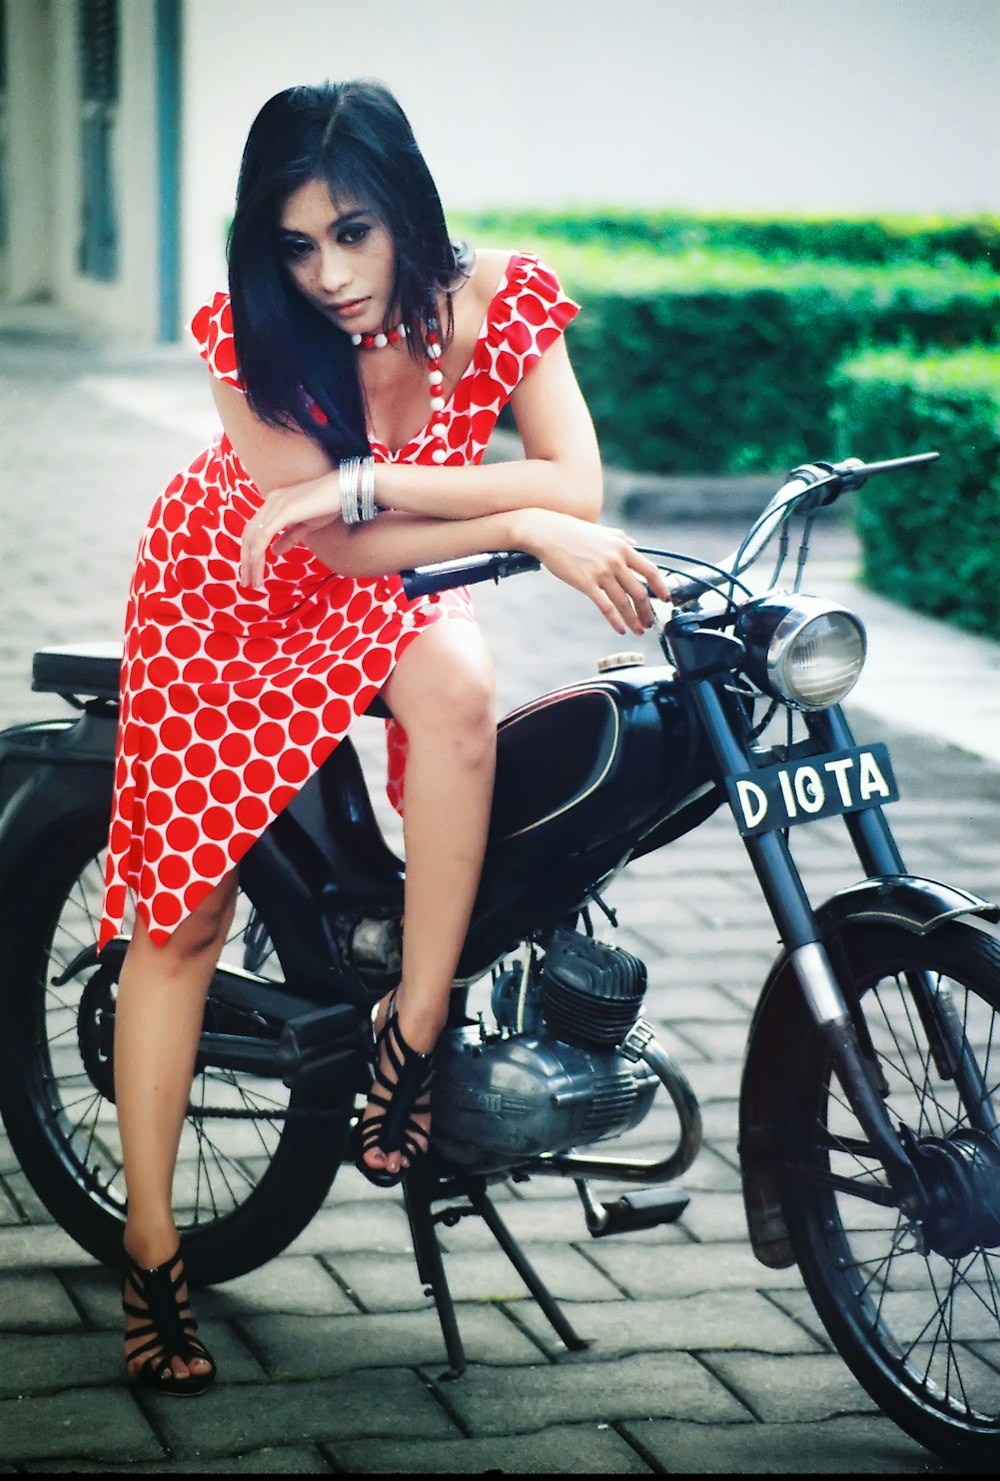 woman in red and white polka dot dress riding on black motorcycle